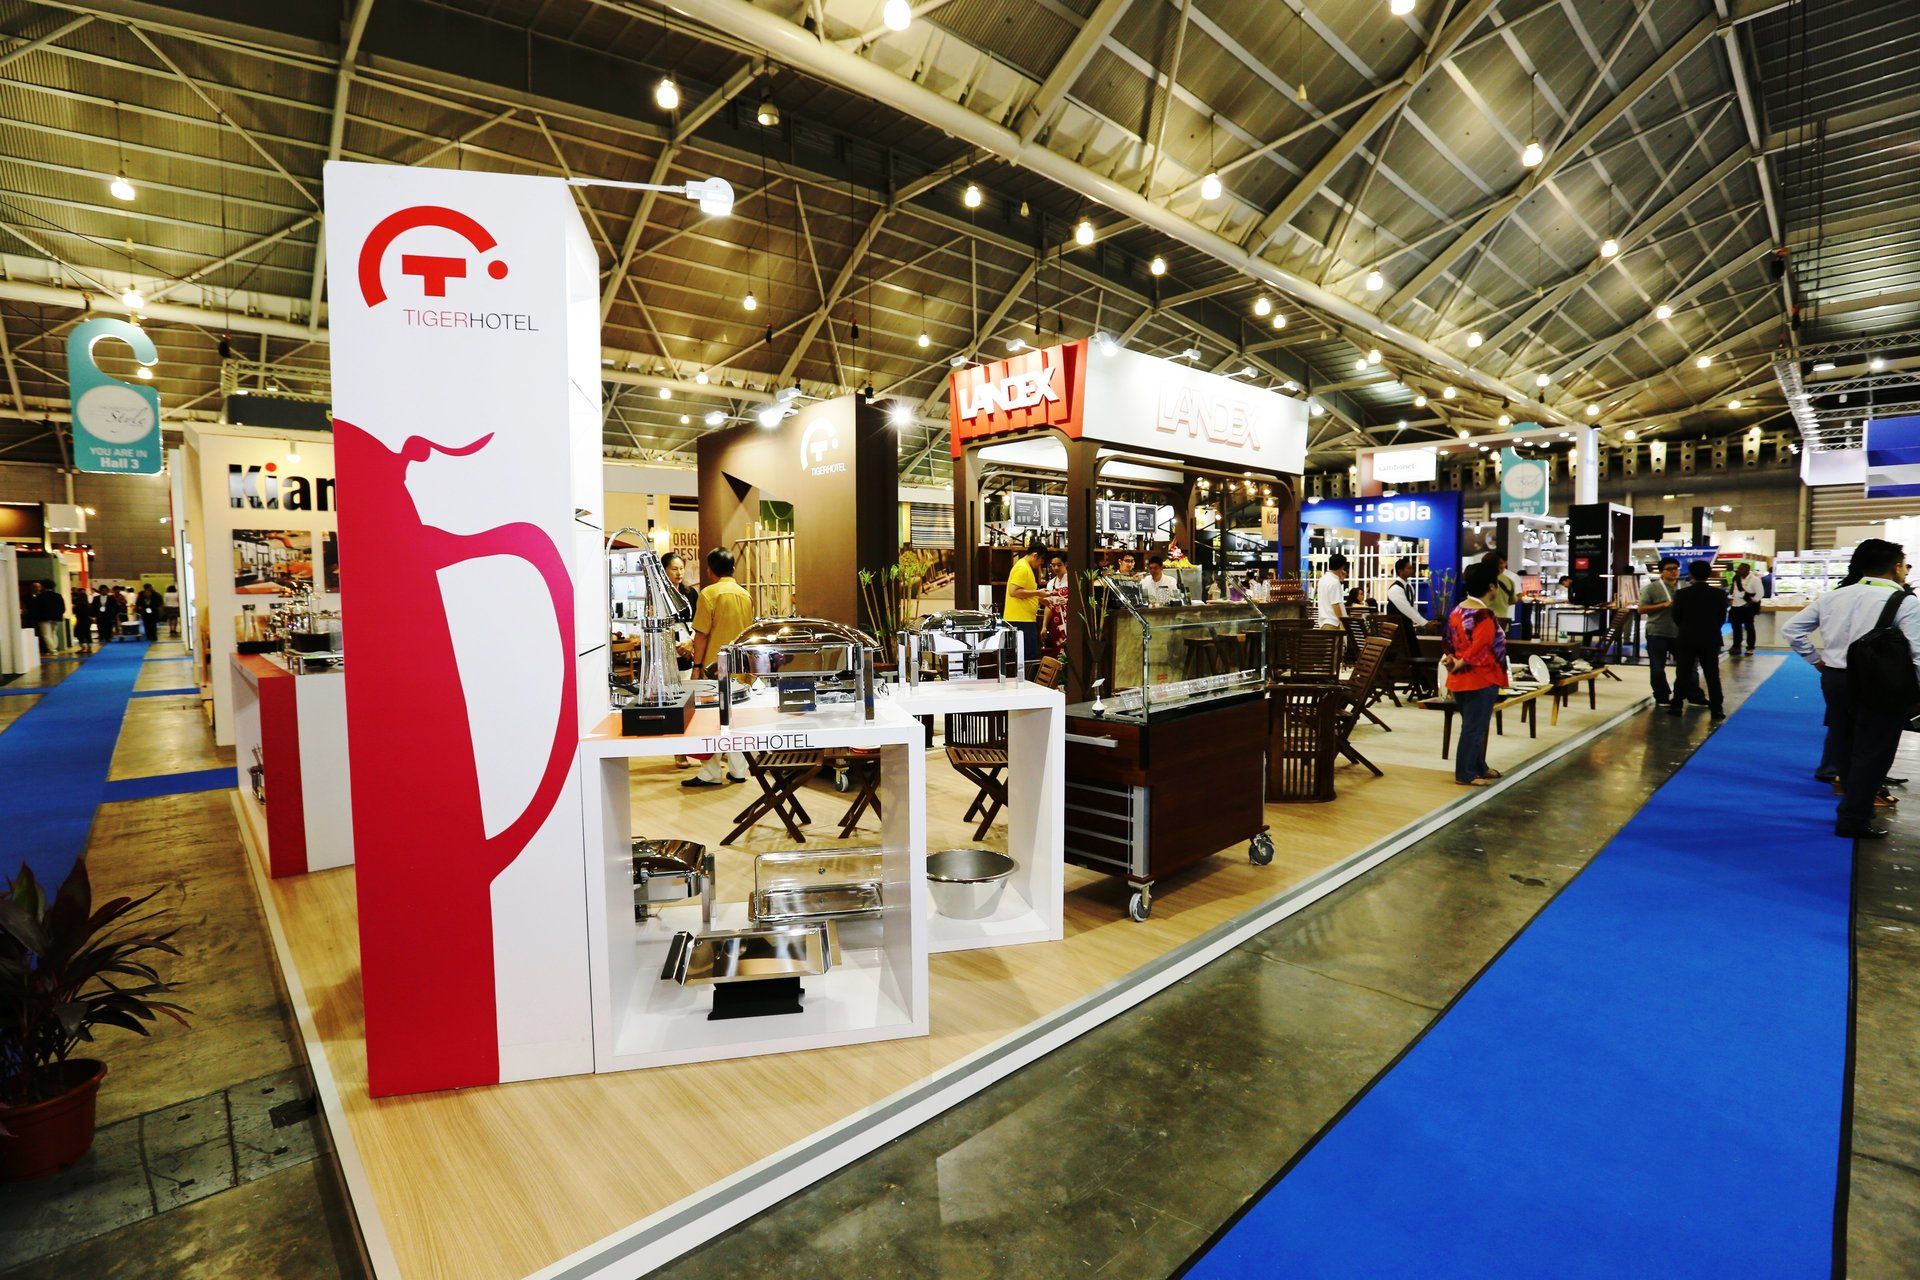 Landex @ Food & Hotel Asia 2016. Booth designed and built by Essential Global Fairs.